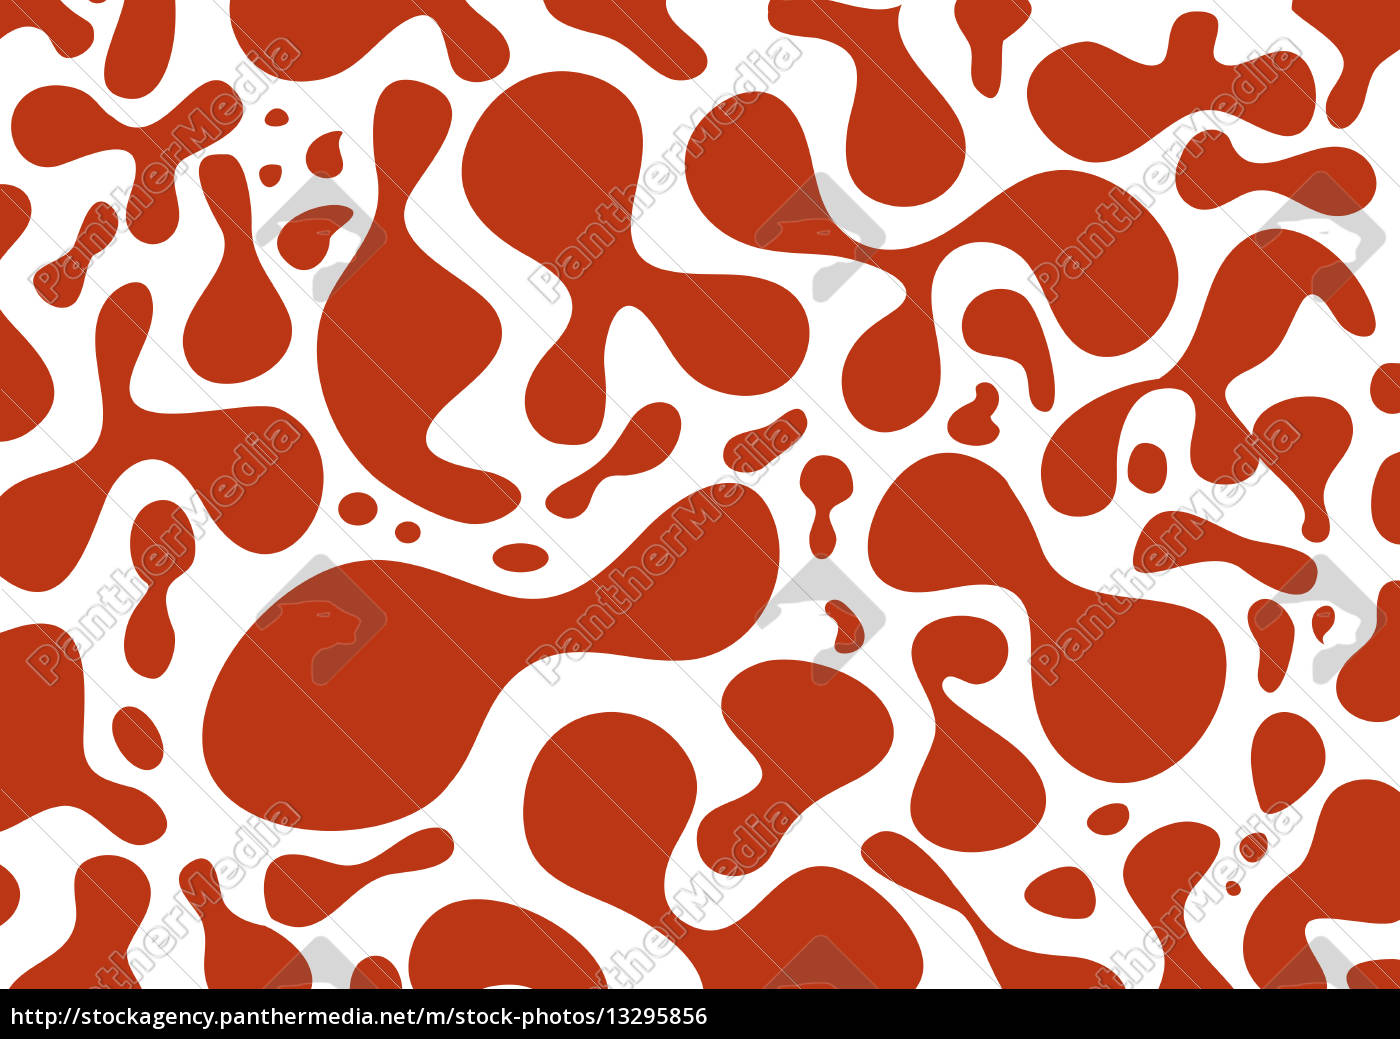 Download Cow Pattern Red3 Royalty Free Photo 13295856 Panthermedia Stock Agency